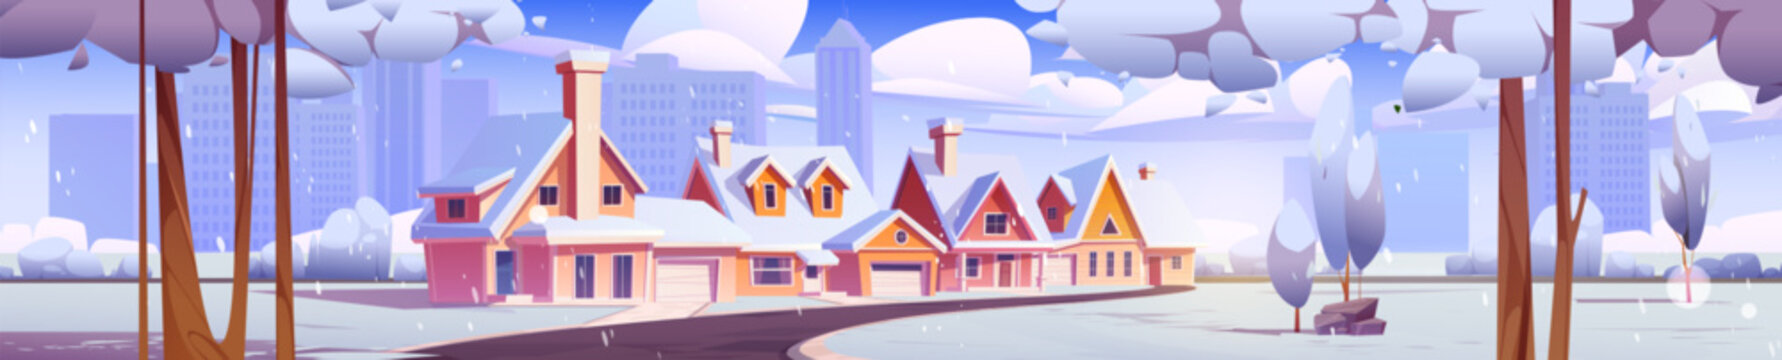 Winter town street against big city background. Vector cartoon illustration of suburban houses along rural alley under cloudy sky, trees and bushes covered with show, modern skyscrapers on horizon